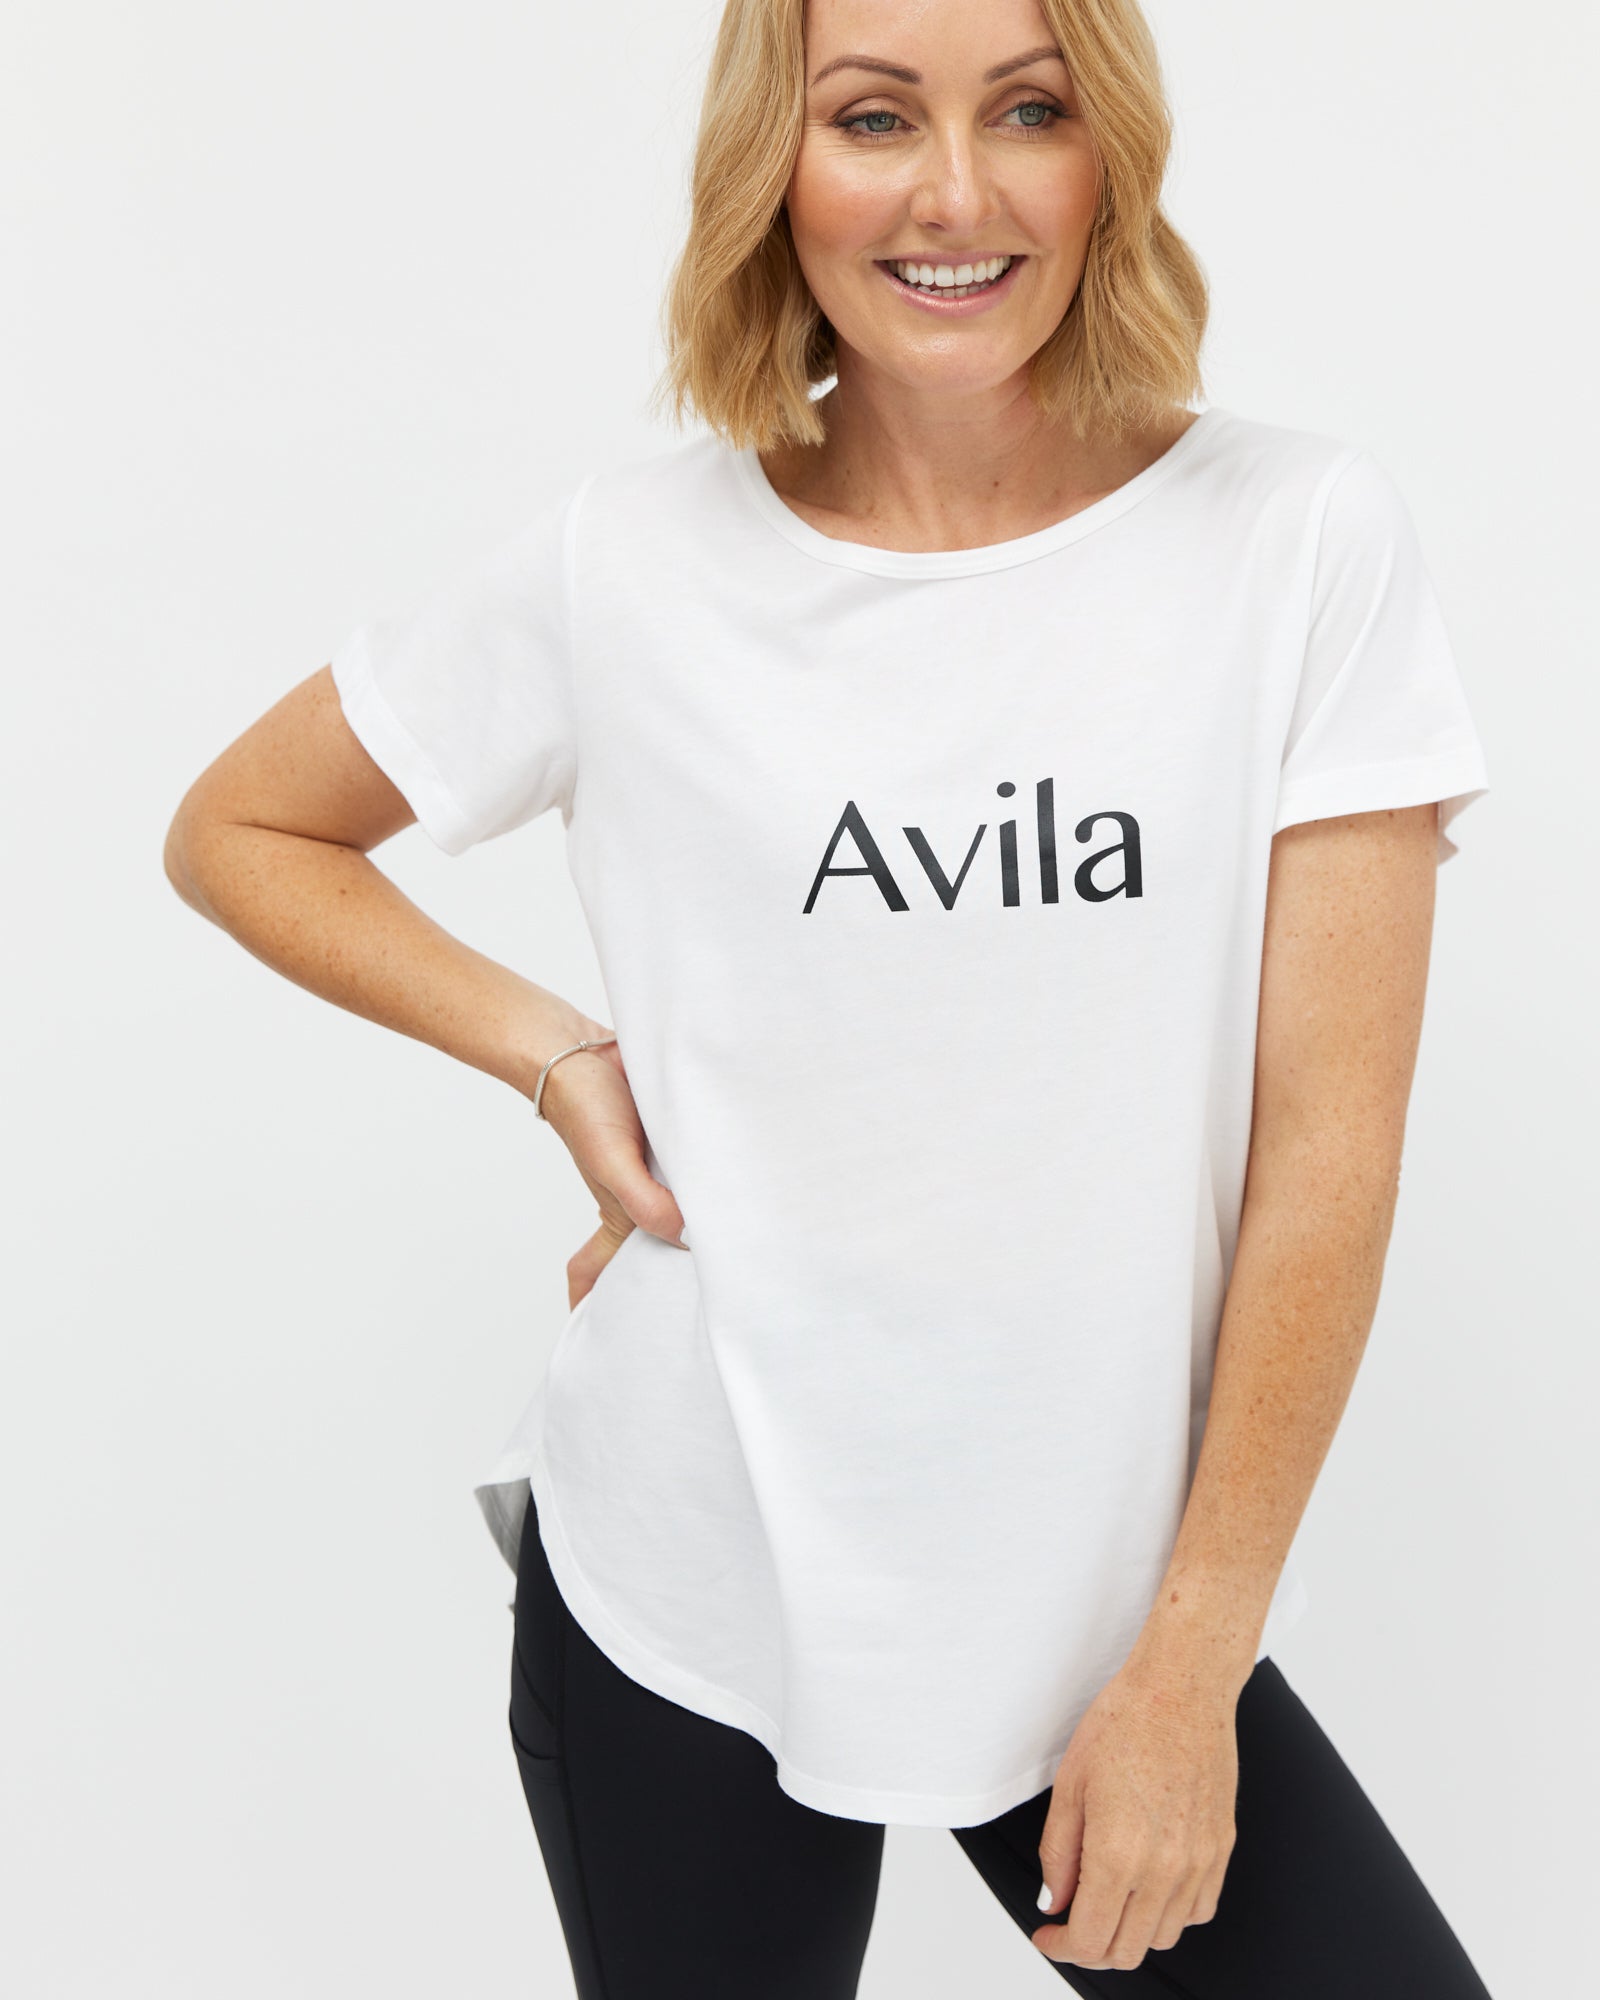 Products Tagged activewear - Avila the label